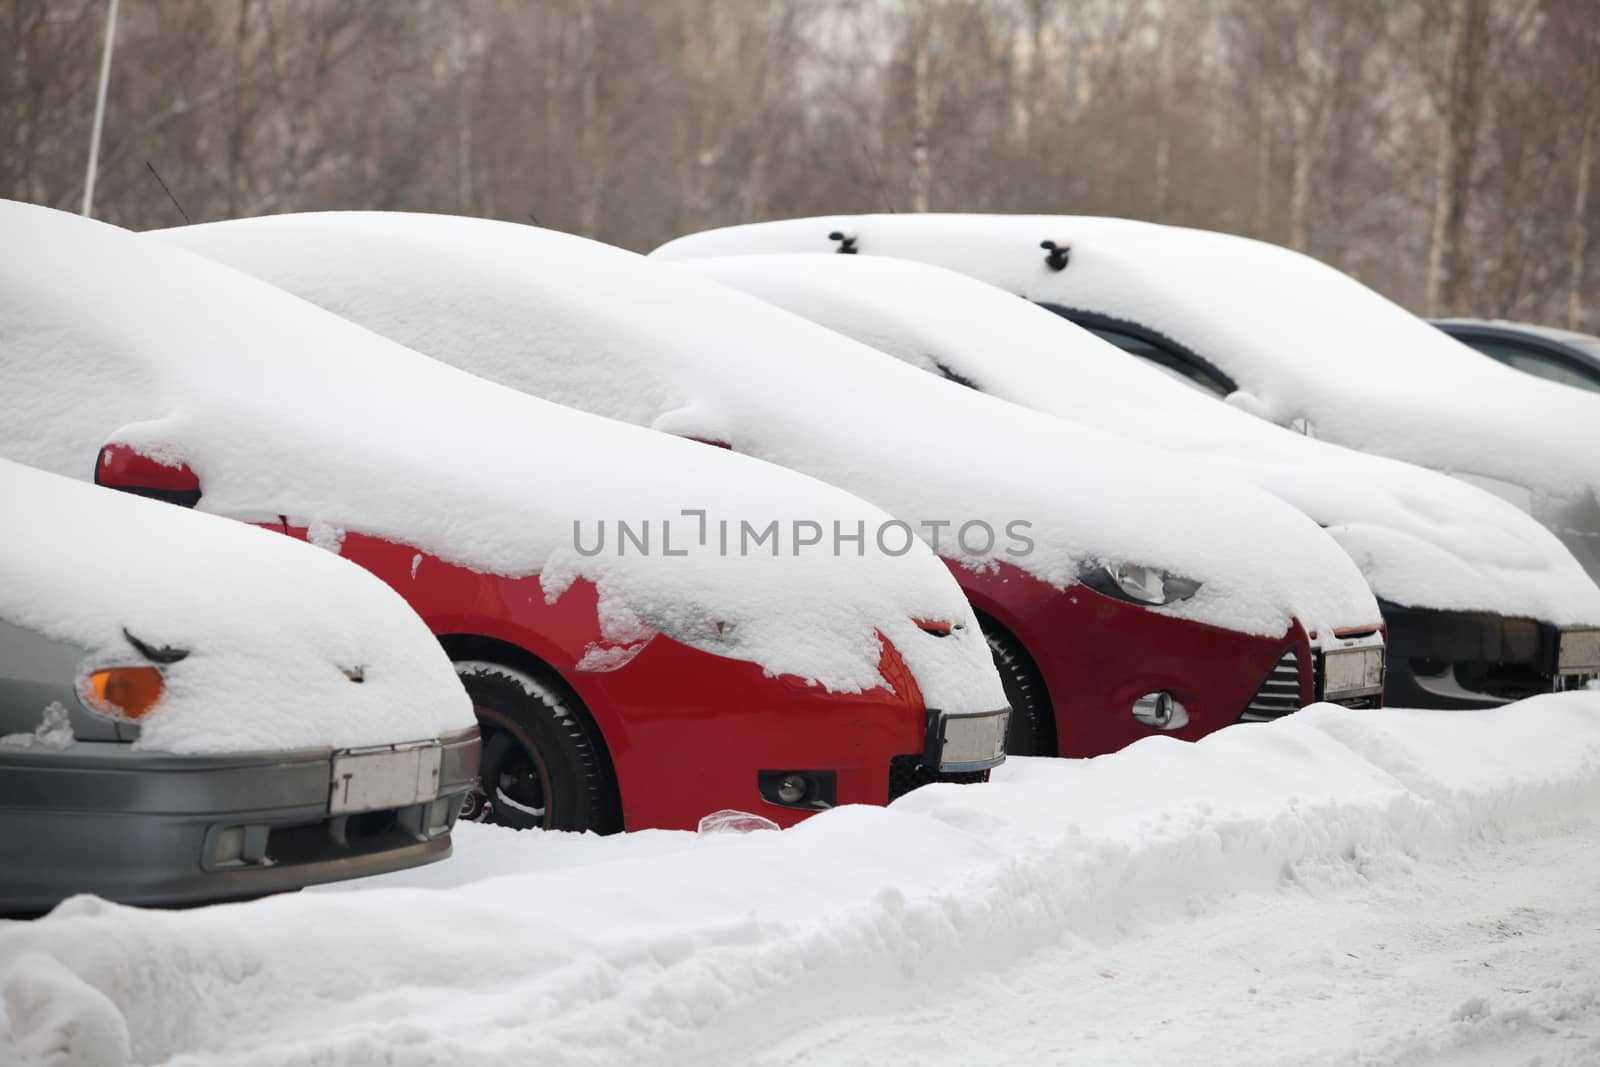 Parking row of cars covered with snow, on road big snowdrifts, snow storm, Cold winter,